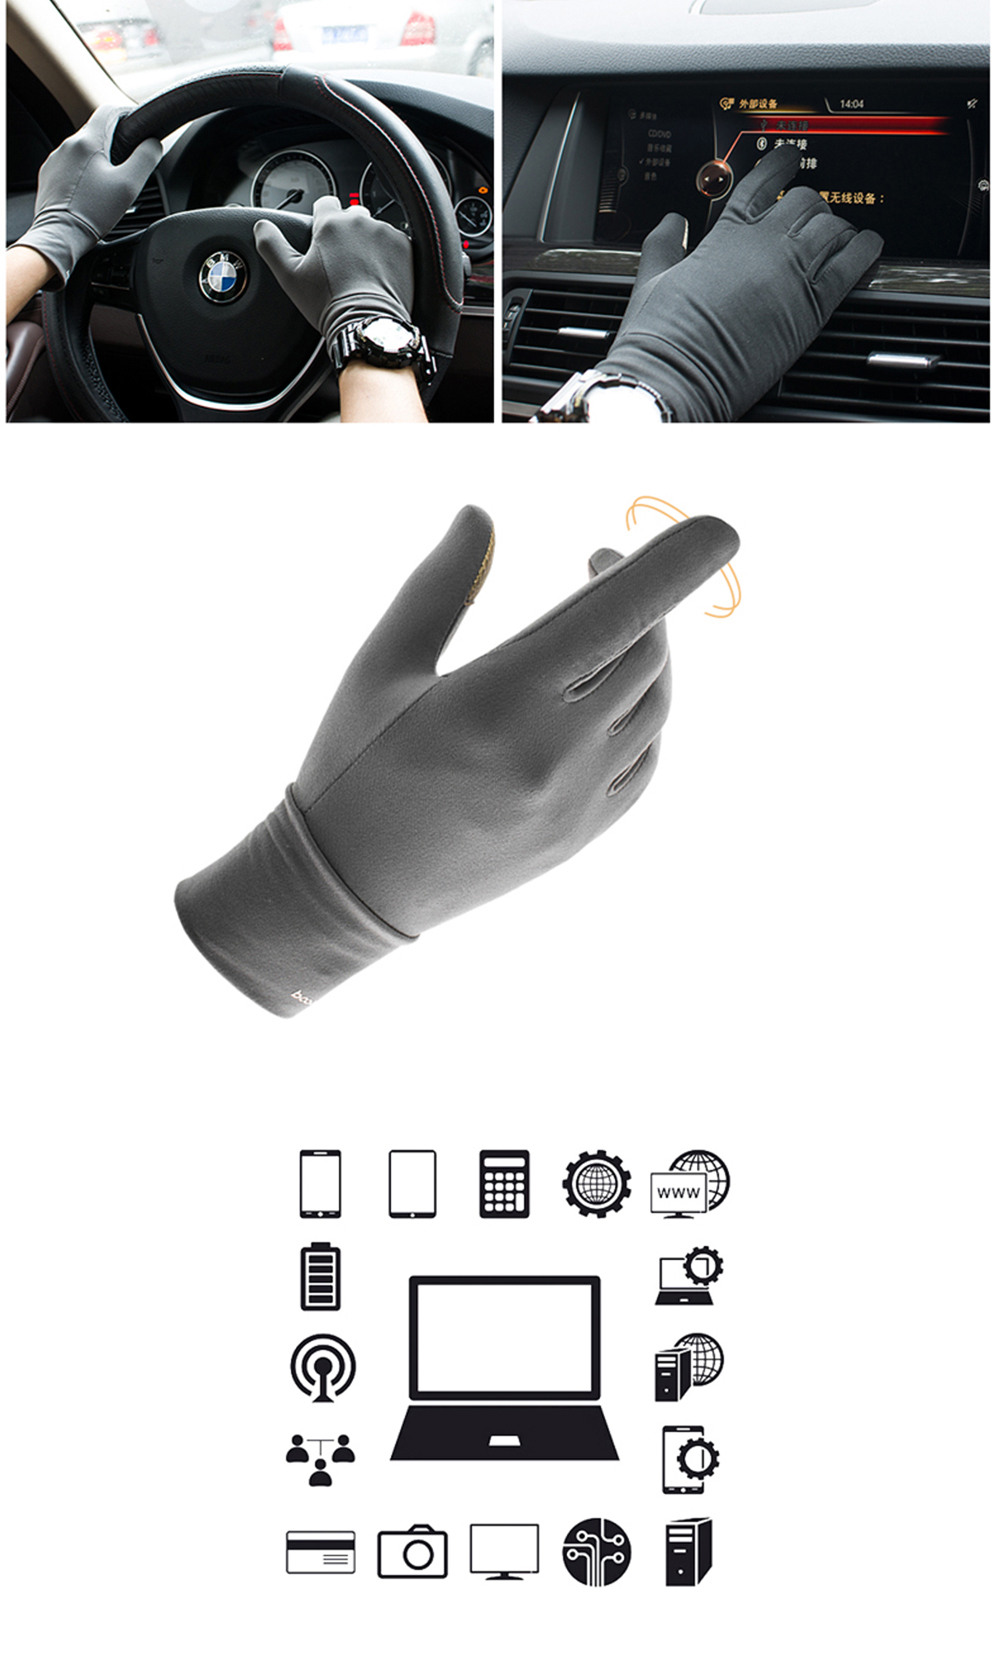 Bakeey-Screen-Touch-Gloves-Elastic-Lycra-Warm-Anti-slip-Anti-sweat-Electronic-Sports-Outdoor-Motorcy-1625057-8